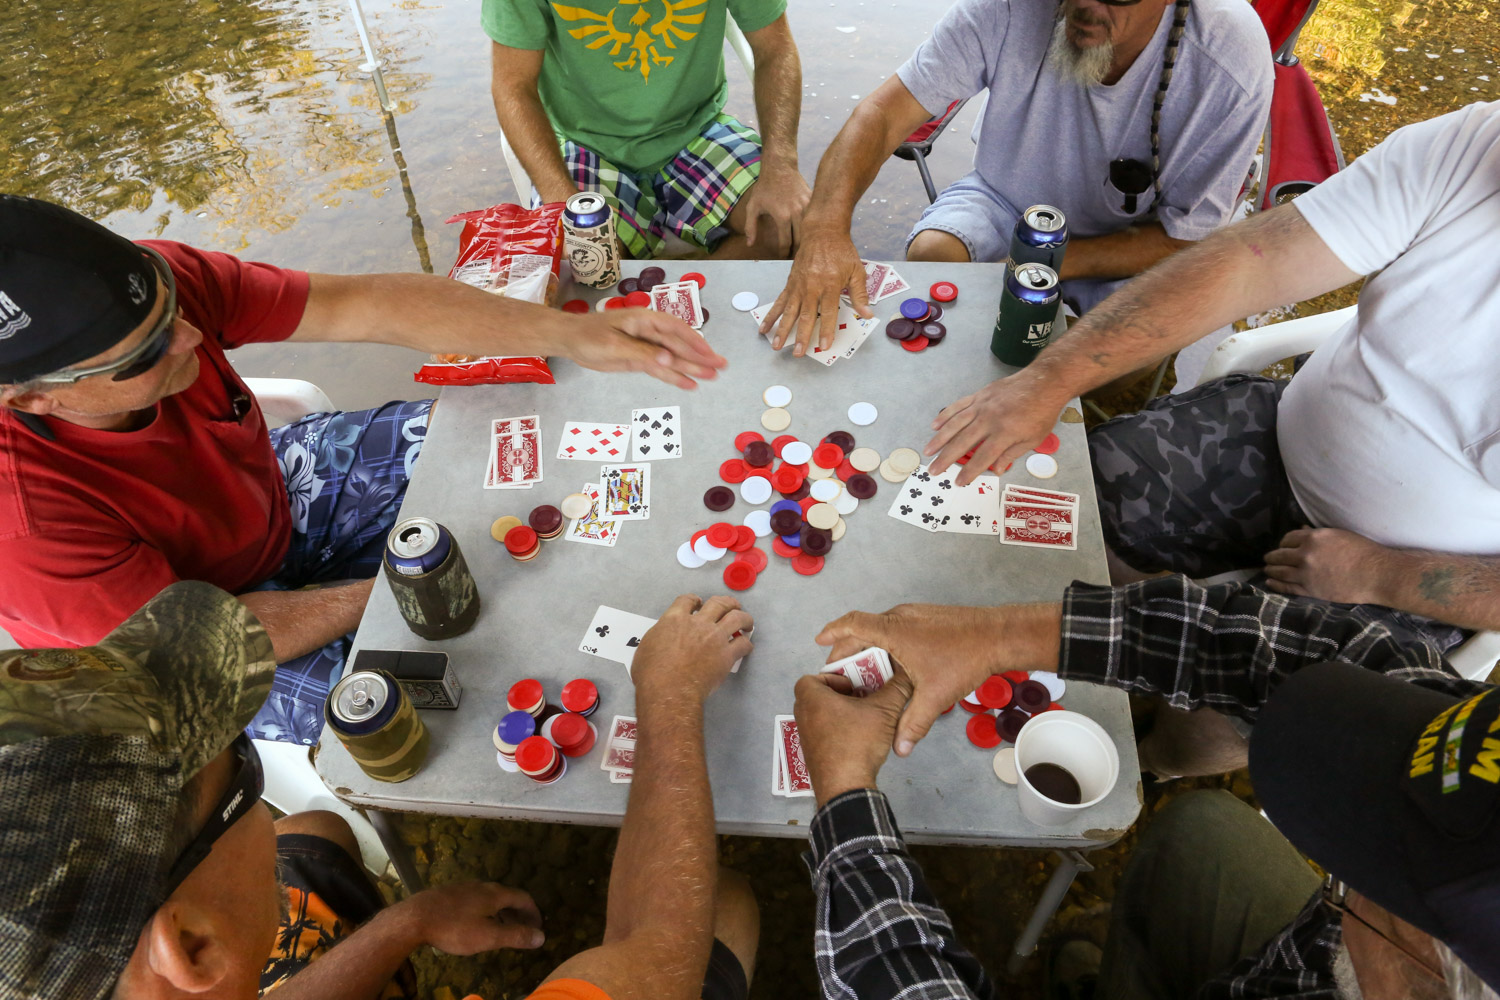  Paul and Joe play poker and drink beer with friends and coworkers. Their unique tradition started several years ago while camping during summer heat. 